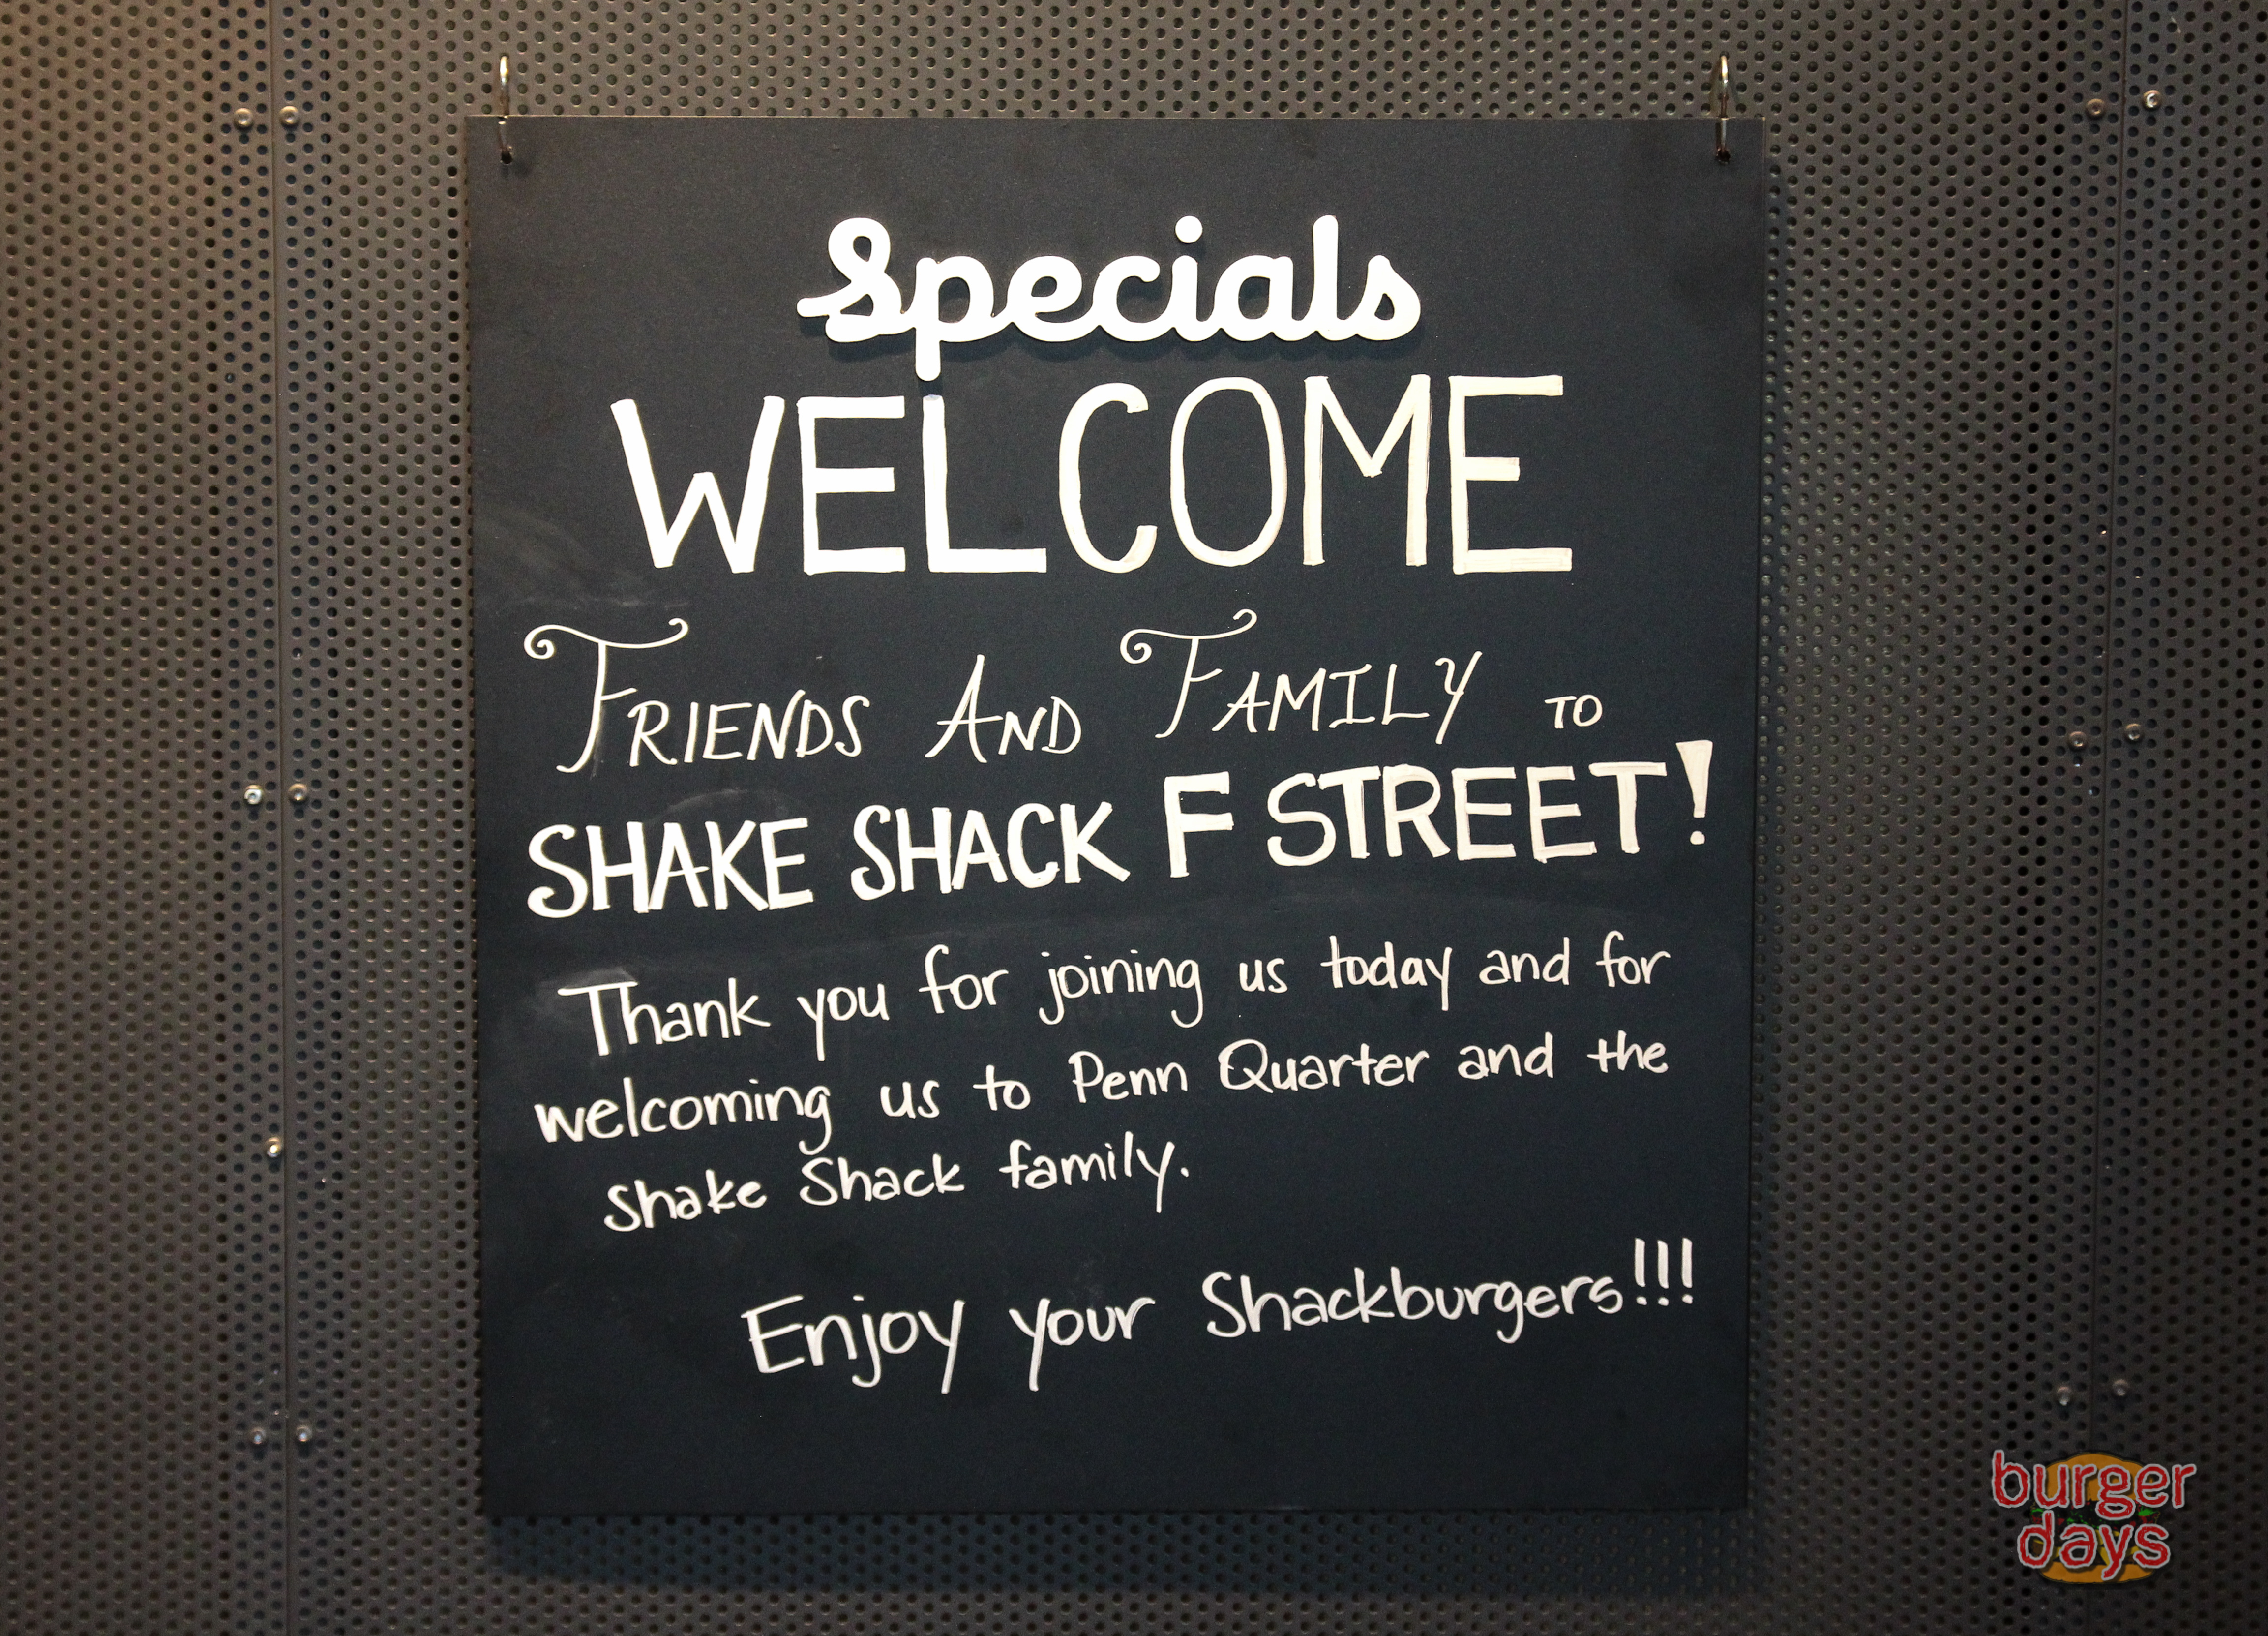 Shake Shack - Weekend lineup: your friends, the game, and